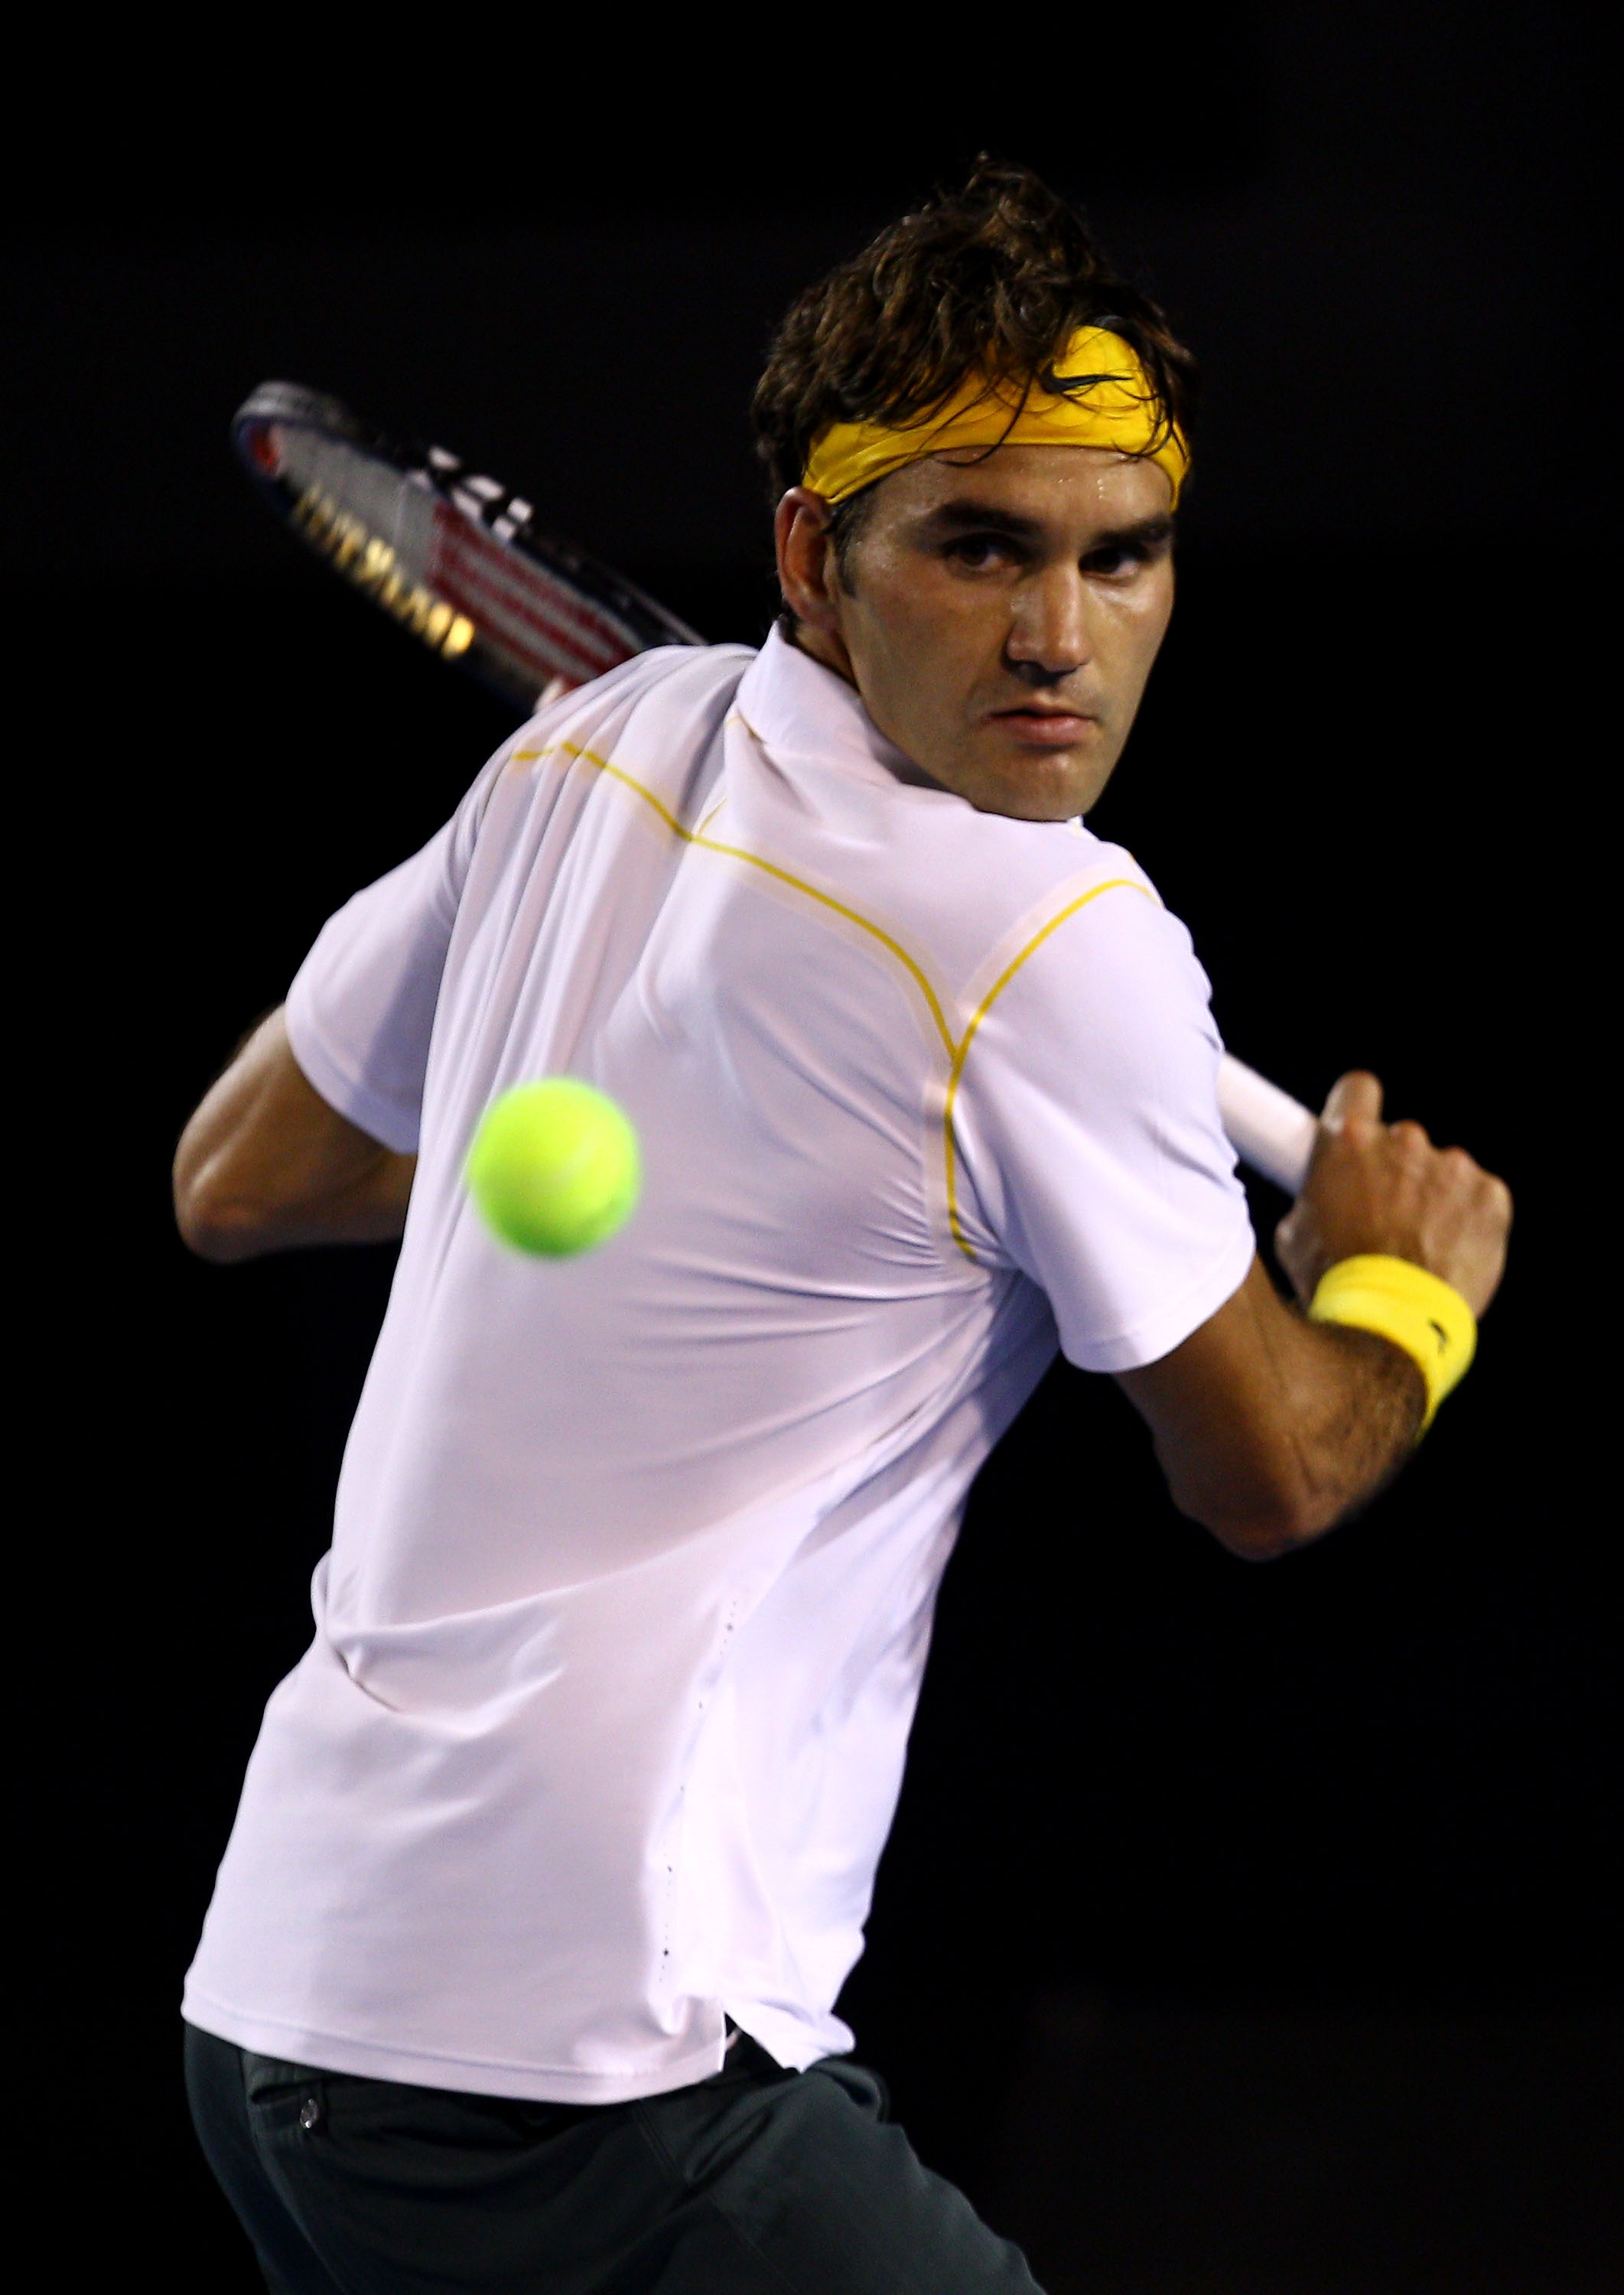 MELBOURNE, AUSTRALIA - JANUARY 27:  Roger Federer of Switzerland plays a backhand in his semifinal match against Novak Djokovic of Serbia during day eleven of the 2011 Australian Open at Melbourne Park on January 27, 2011 in Melbourne, Australia.  (Photo